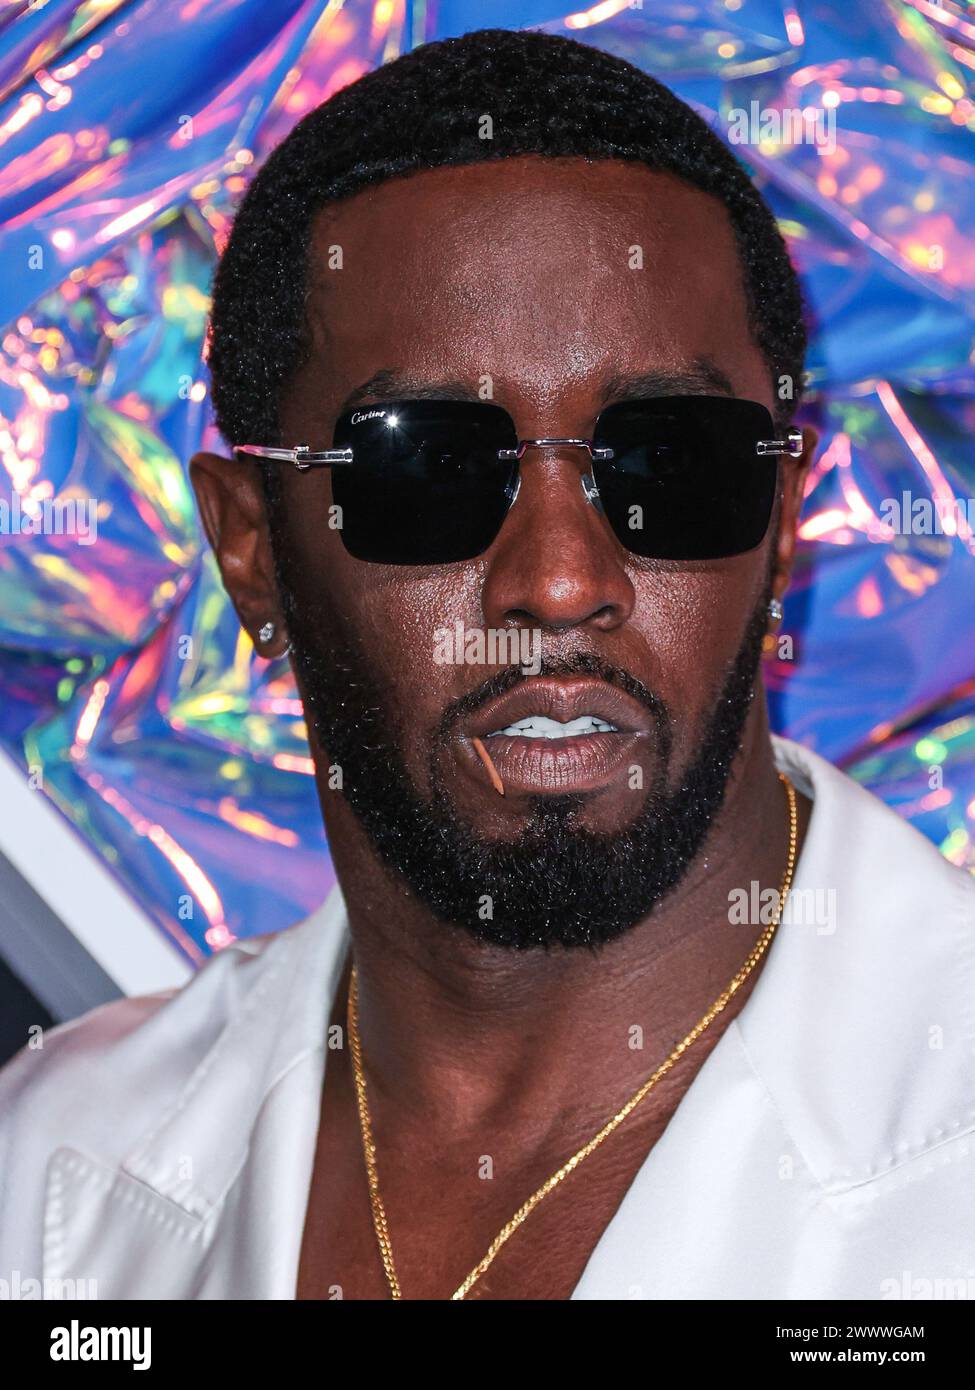 (FILE) Diddy's Los Angeles and Miami Homes Raided by Federal Law Enforcement on Monday, March 25, 2024. NEWARK, NEW JERSEY, USA - SEPTEMBER 12: American rapper, record producer and record executive Diddy (Sean Love Combs, also known by his stage names Puff Daddy or P. Diddy) arrives at the 2023 MTV Video Music Awards held at the Prudential Center on September 12, 2023 in Newark, New Jersey, United States. (Photo by Xavier Collin/Image Press Agency) Stock Photo